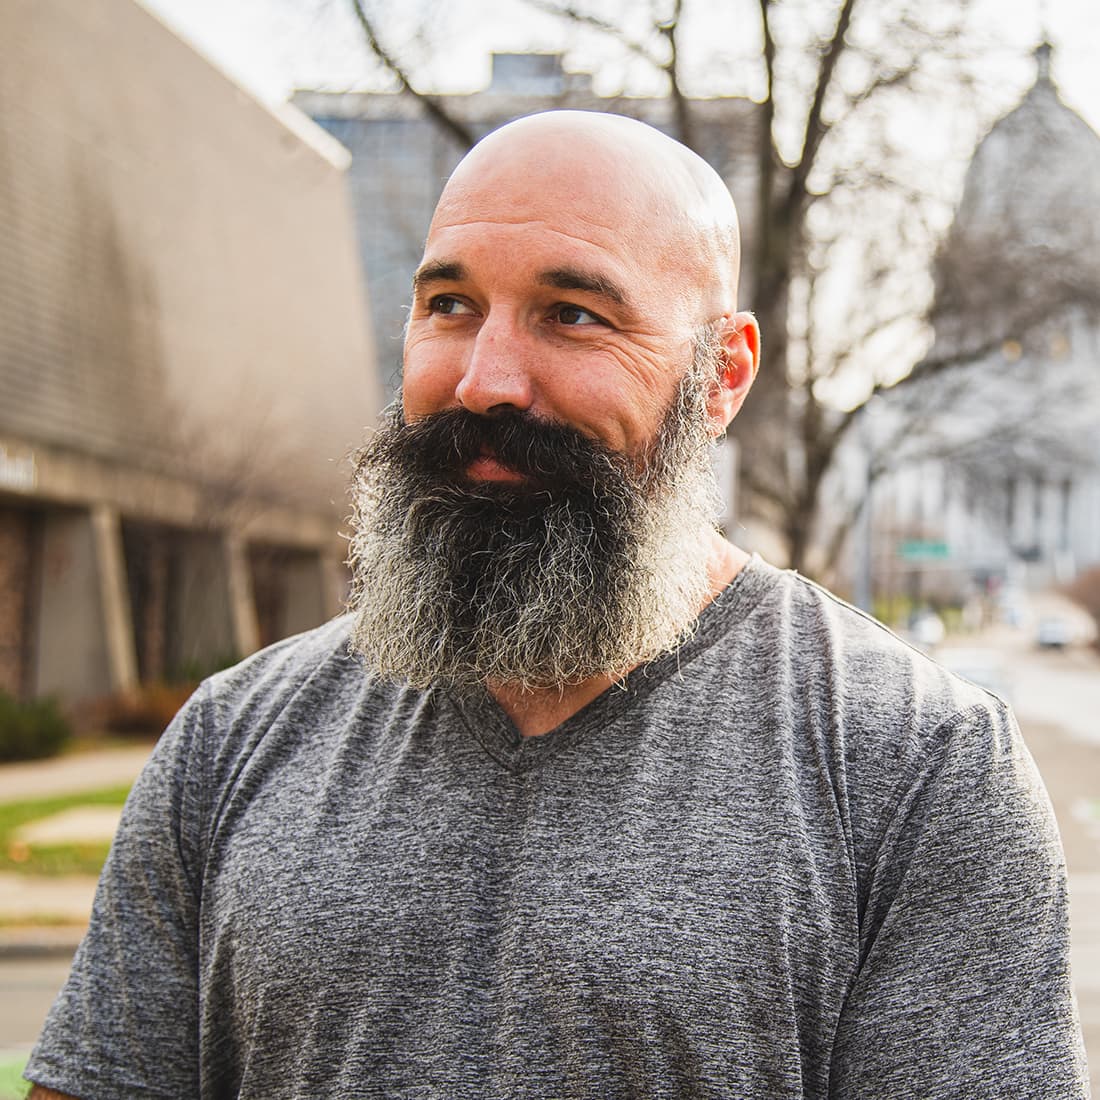 A man with a black and grey beard, standing outside in the sun in front of a legislative building.